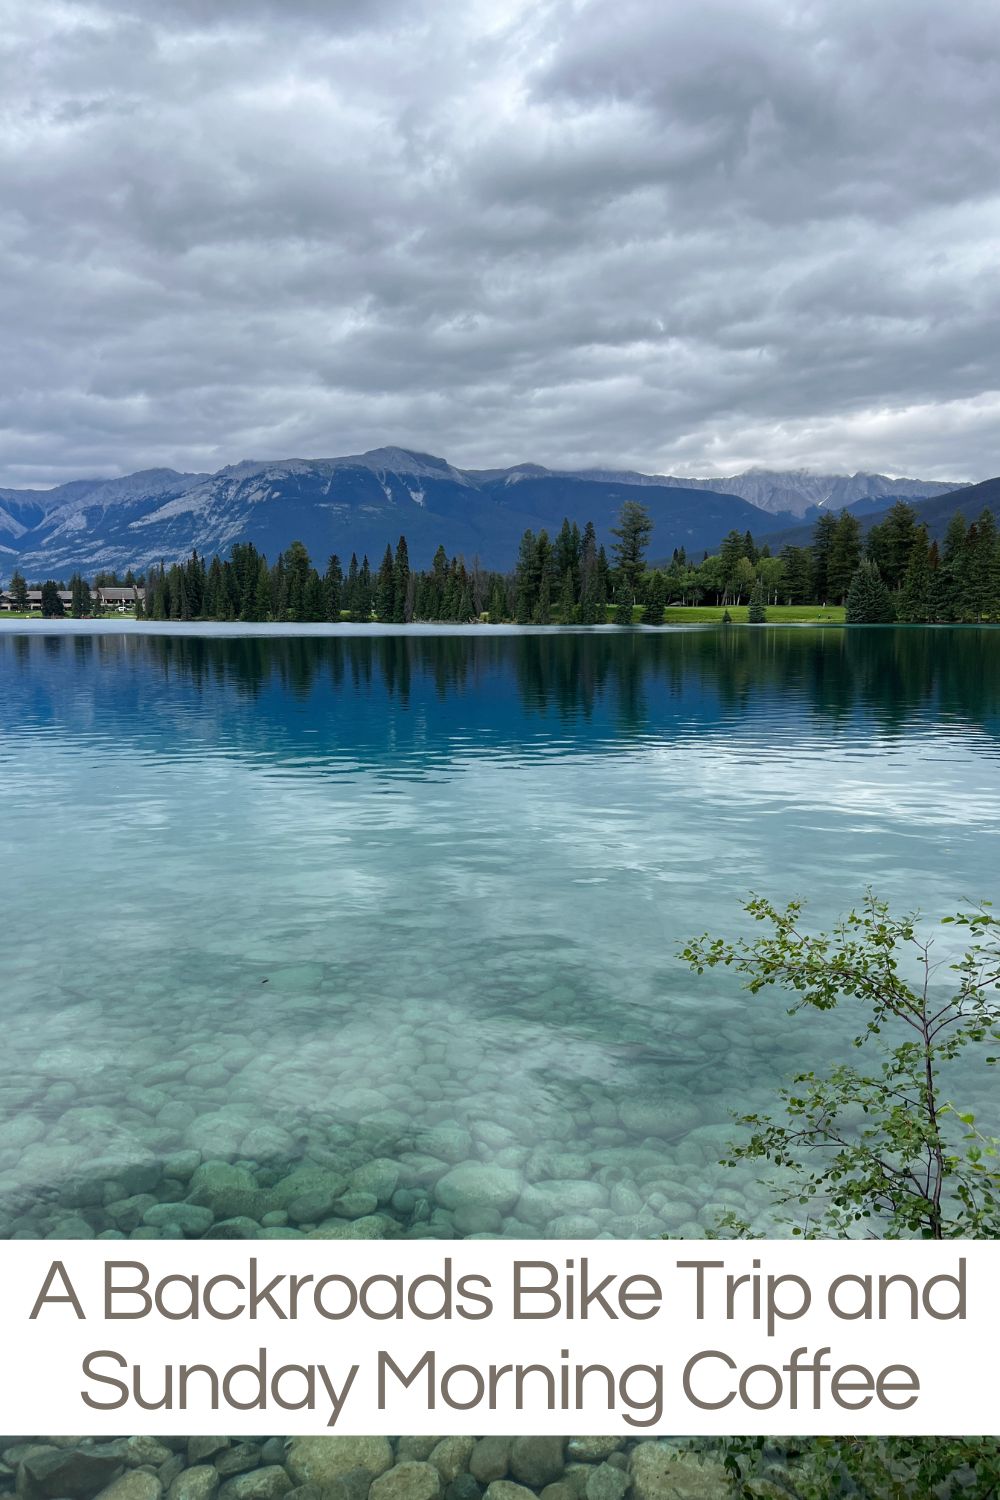 We just returned from our backroads bike trip through Banff, Lake Louise, and Jasper National Park. It was an extraordinary adventure.